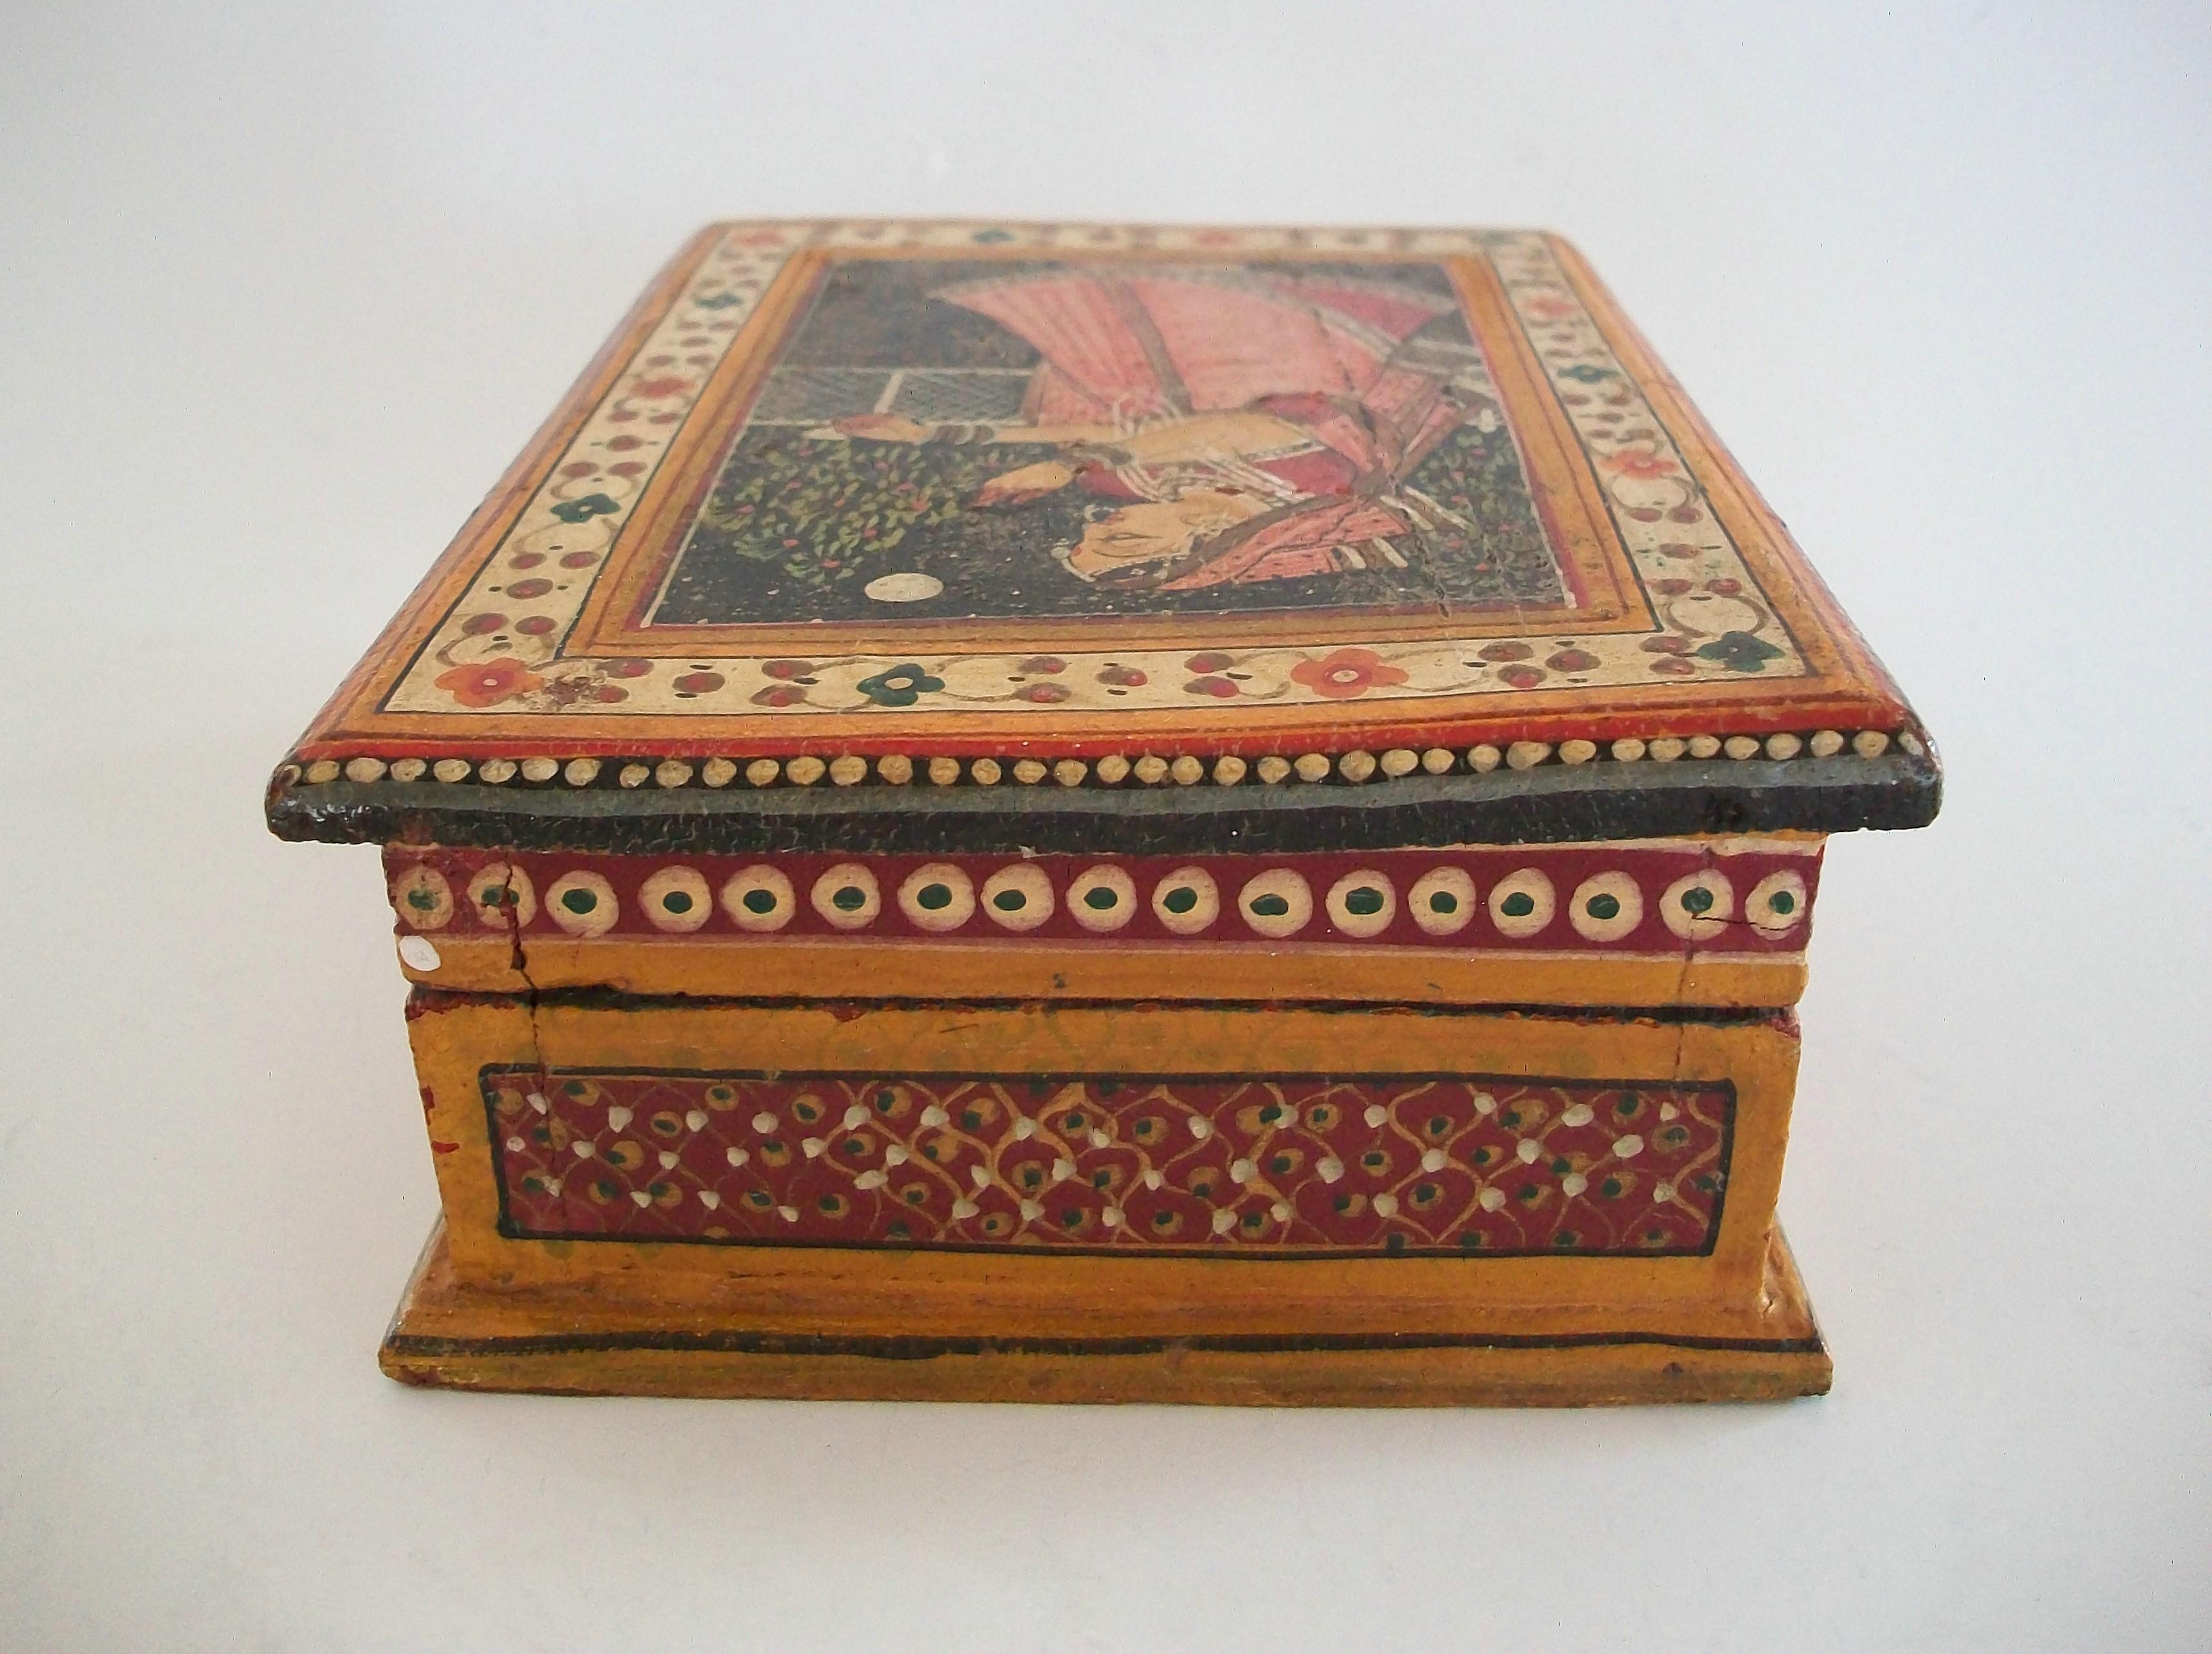 Vintage South Asian Folk Art Hand Painted Wooden Box - India - Mid 20th Century For Sale 1